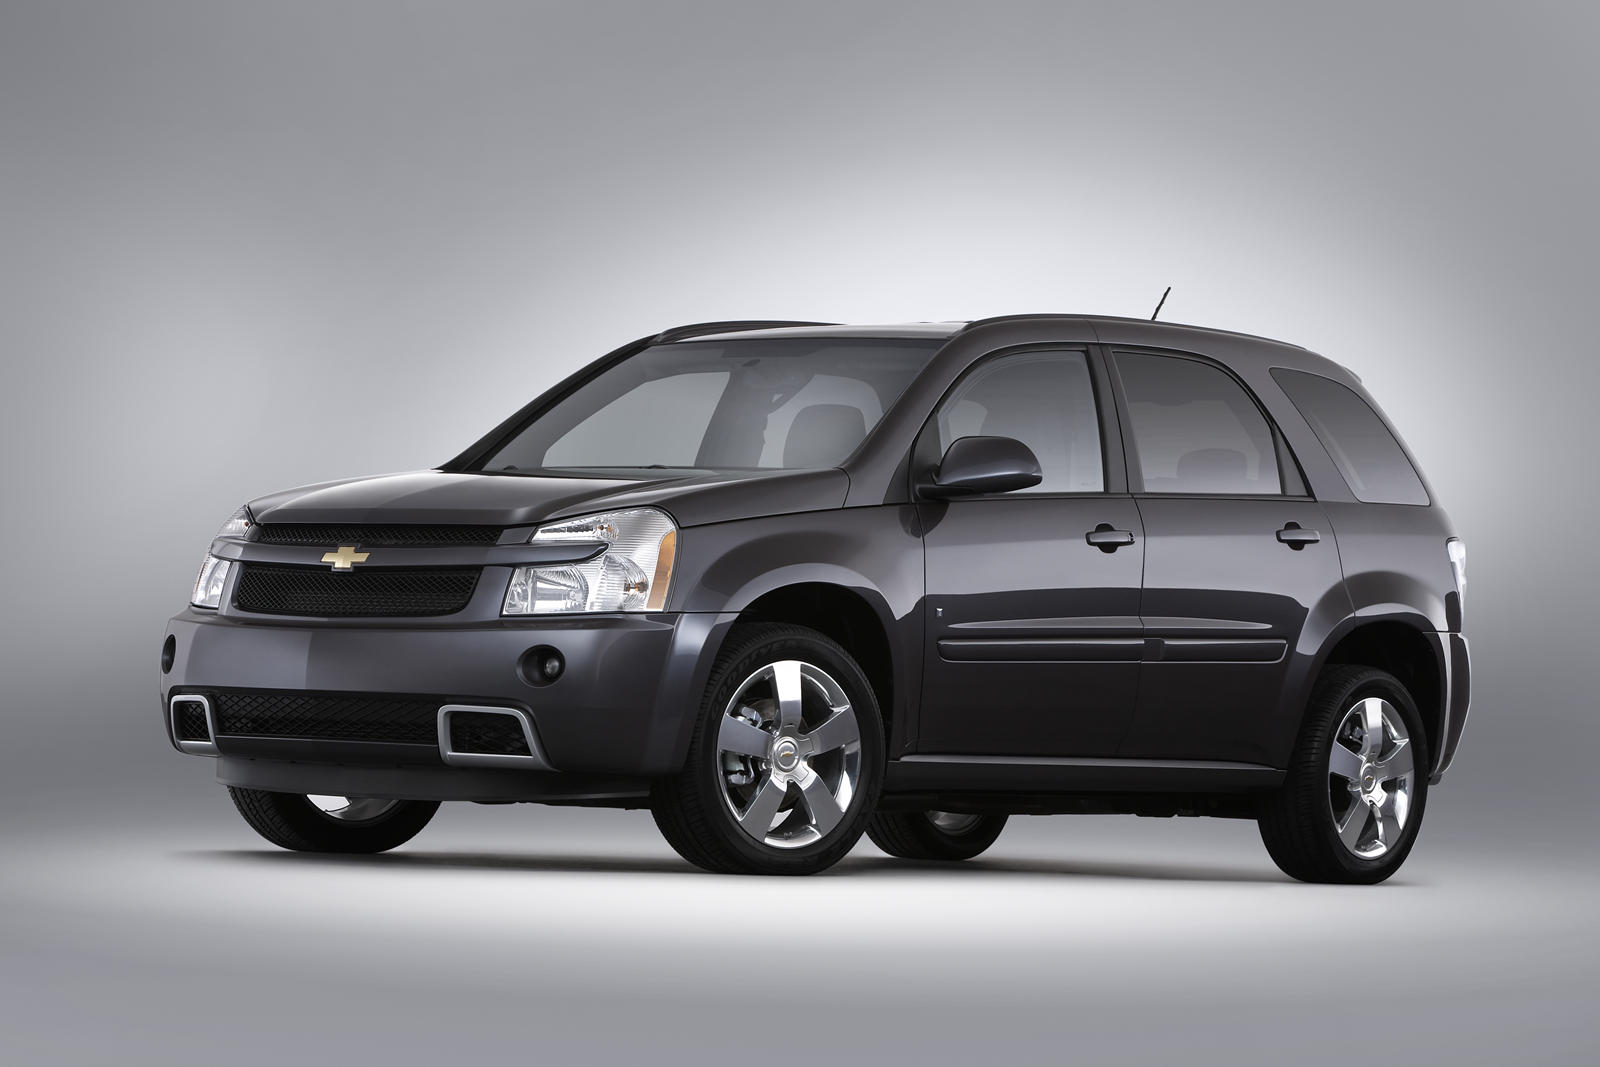 2008 Chevrolet Equinox Front Angle View